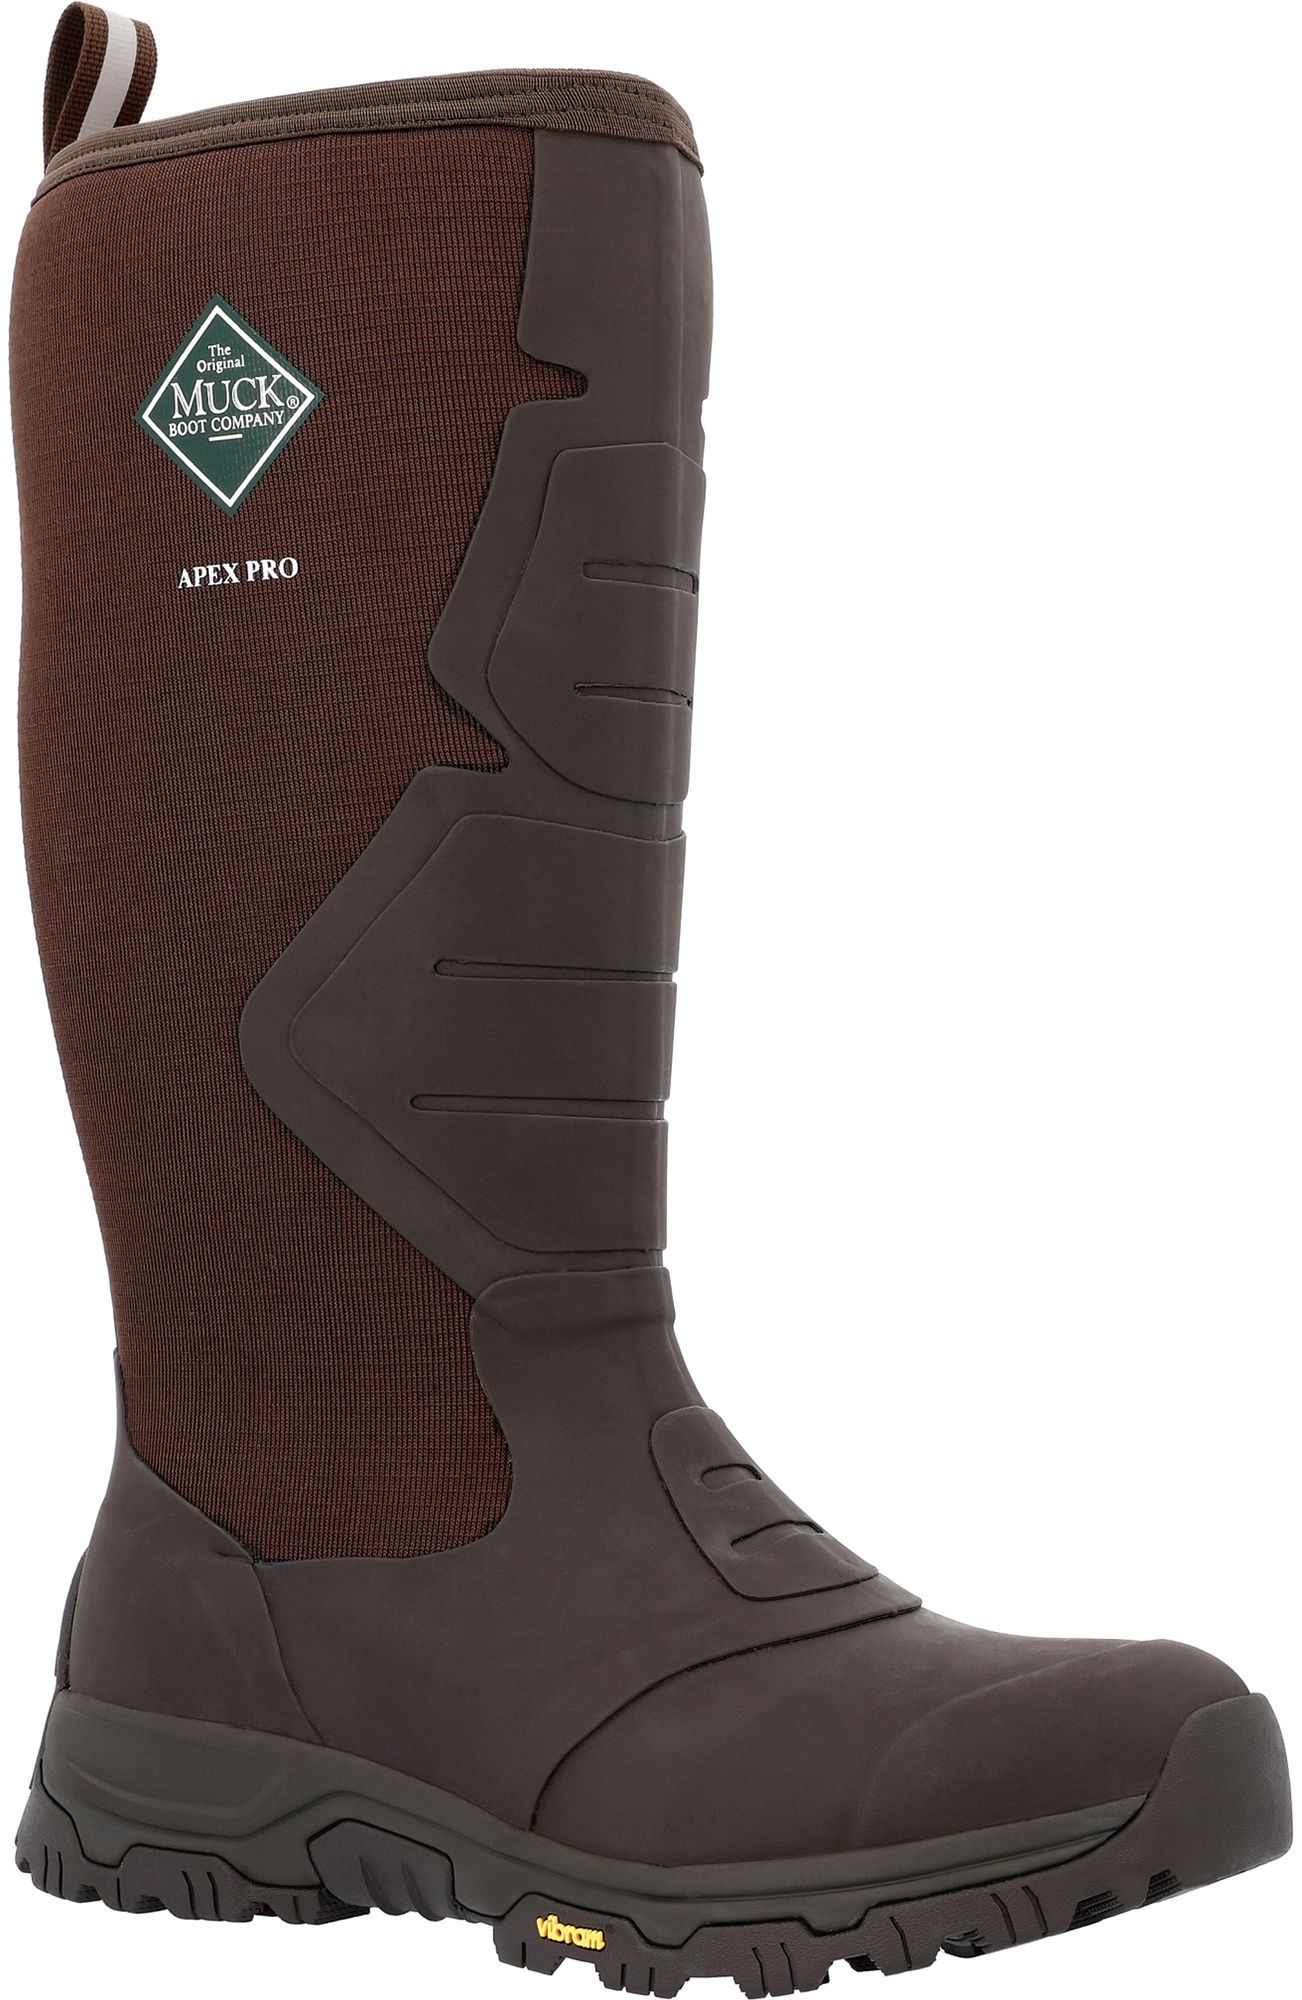 Muck Boots Men's Apex Pro 16" Insulated Waterproof Boots